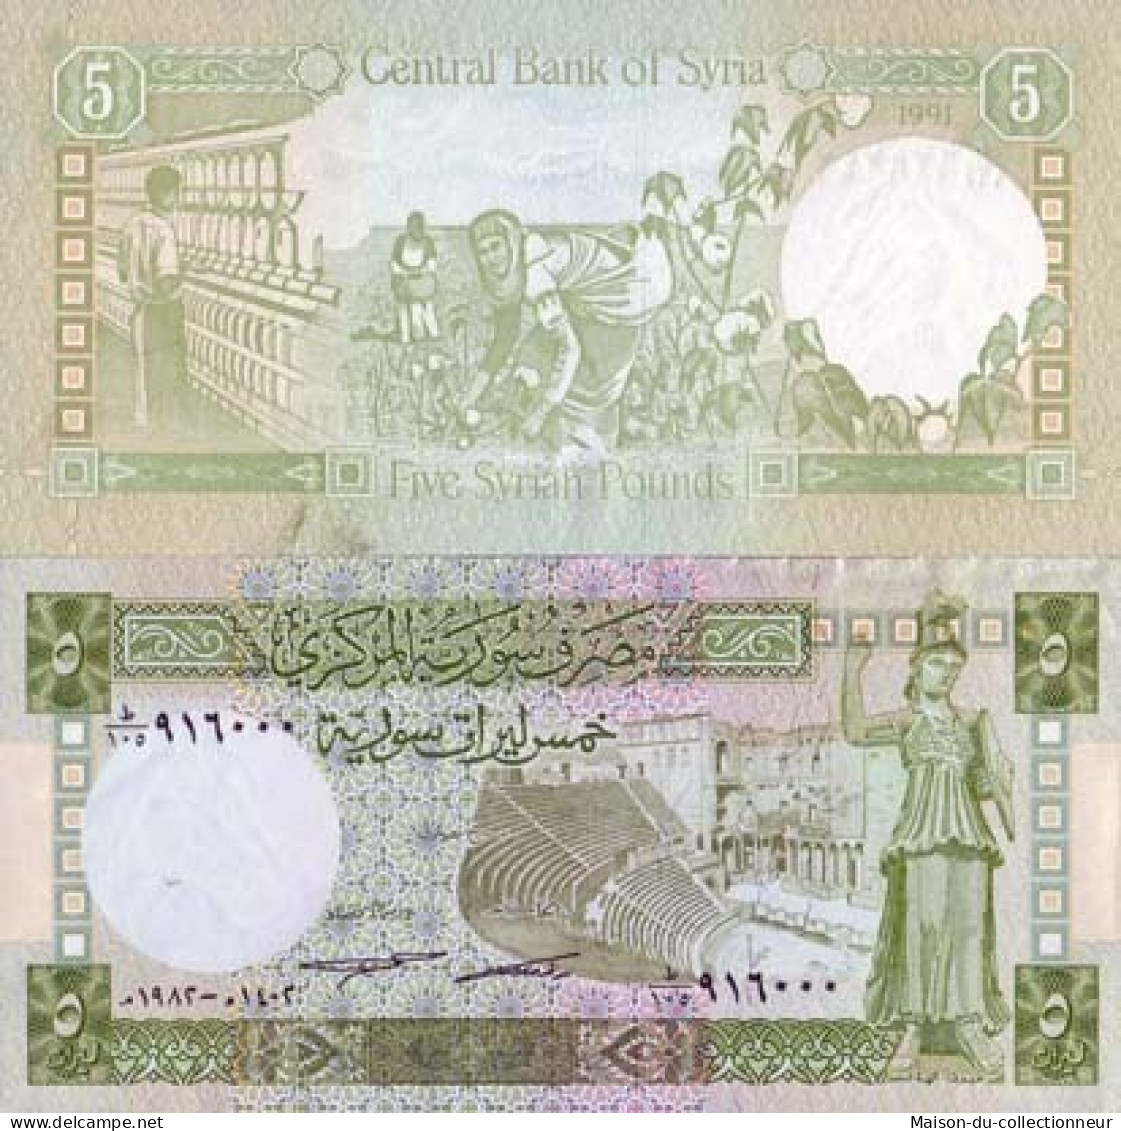 Billet De Collection Syrie Pk N° 100 - 5 Pounds - Syrie